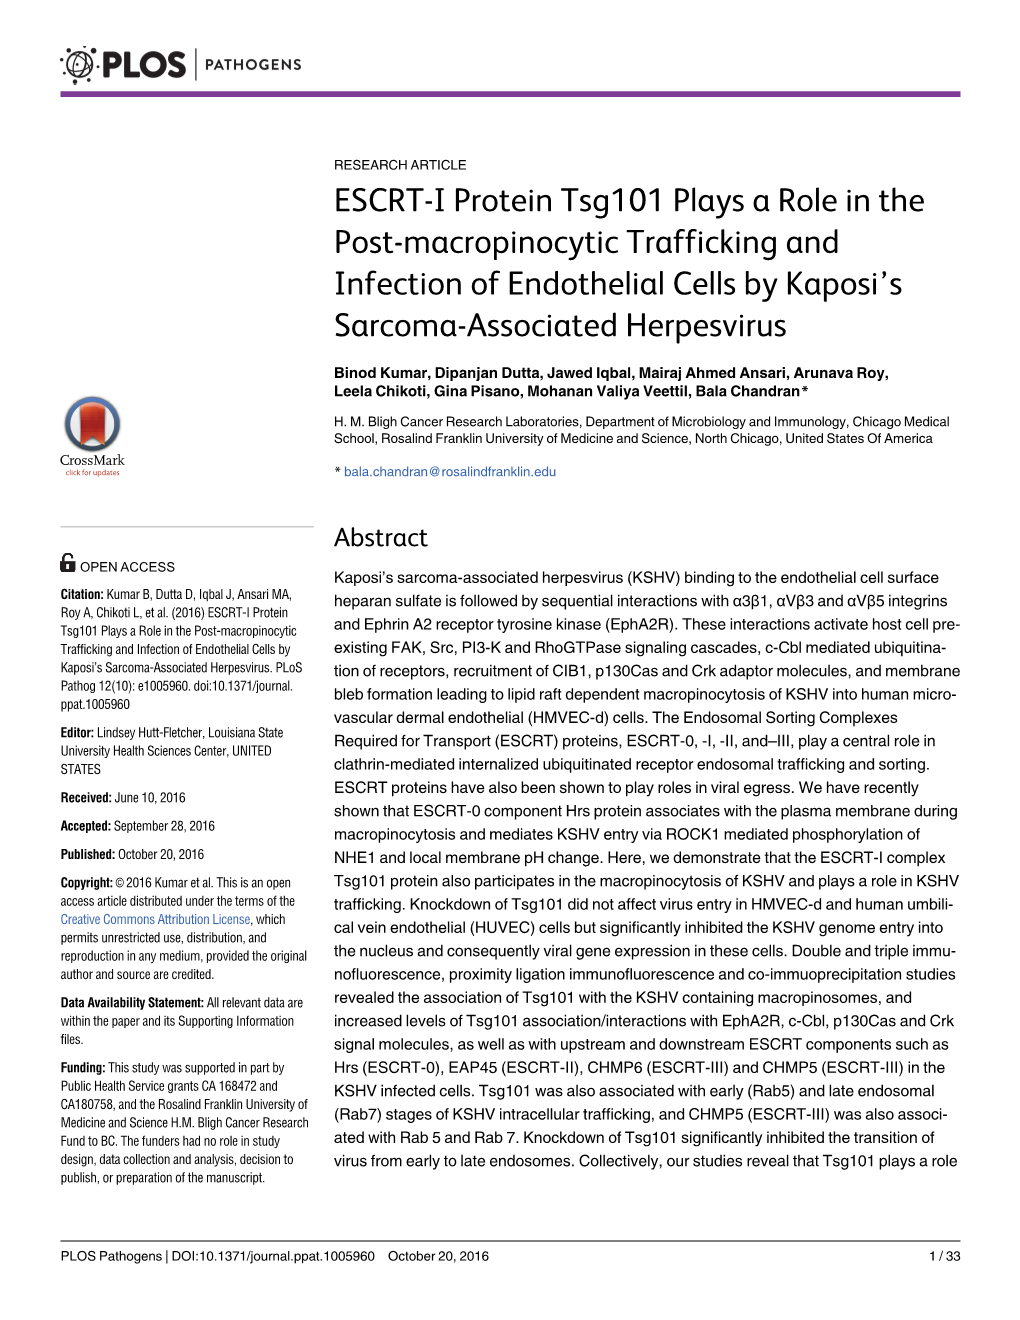 ESCRT-I Protein Tsg101 Plays a Role in the Post-Macropinocytic Trafficking and Infection of Endothelial Cells by Kaposi’S Sarcoma-Associated Herpesvirus